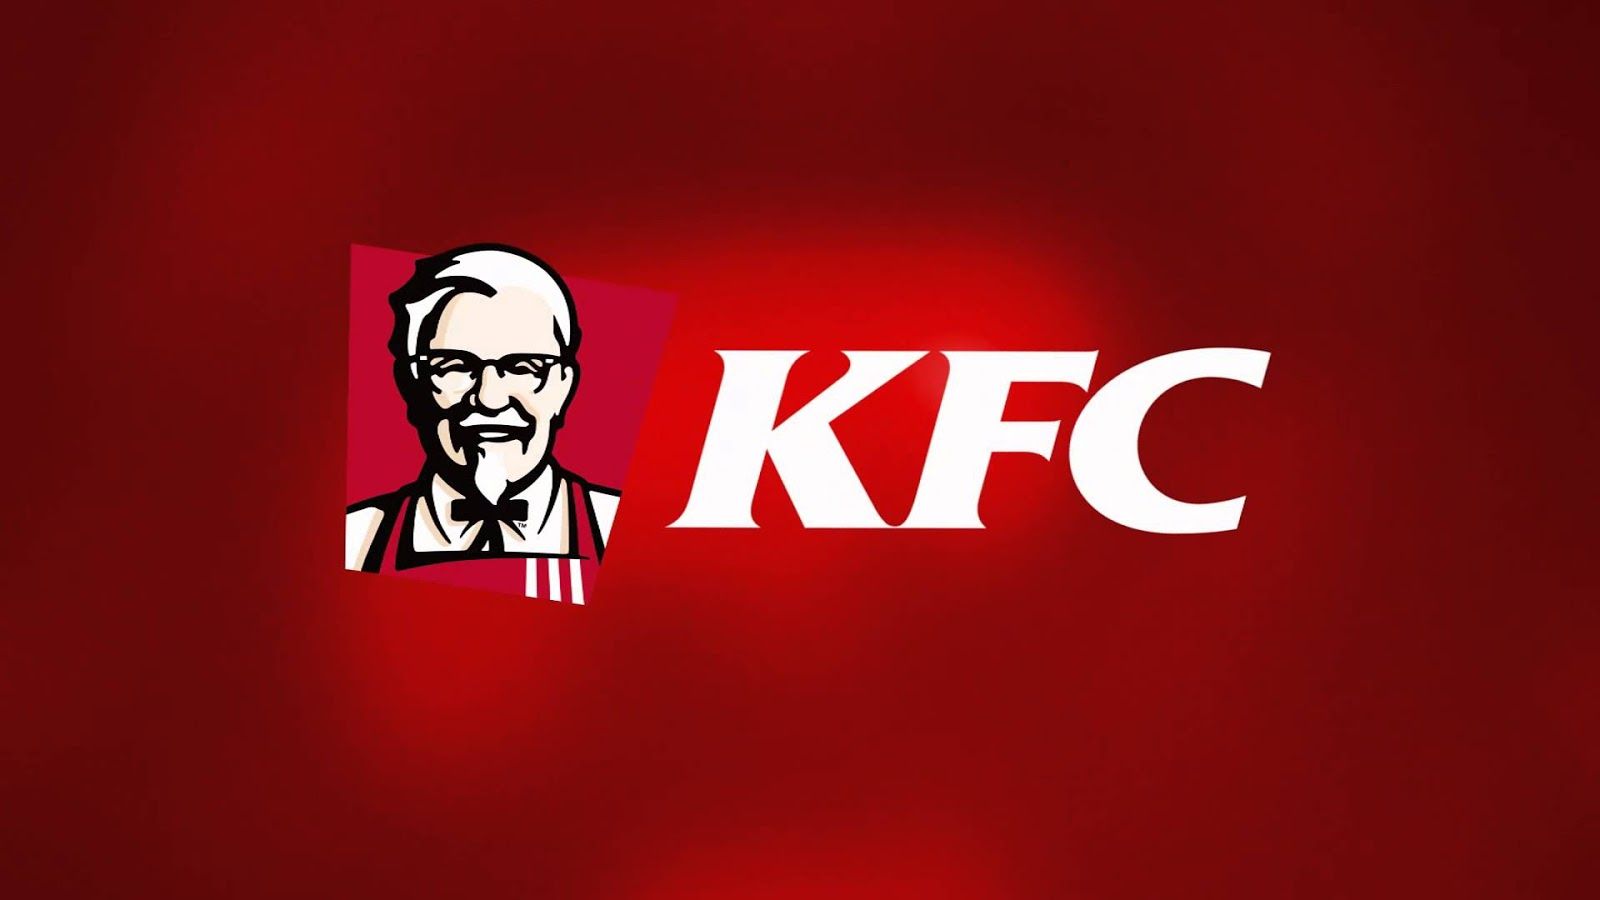 TOP HD WALLPAPER BACKROUND IMAGE FULL HD PICTURES AND PHOTOS ARE FREE DAWONLOD: 101 KFC HD Wallpaper And KFC Fried Chicken Fast Food Picture Download